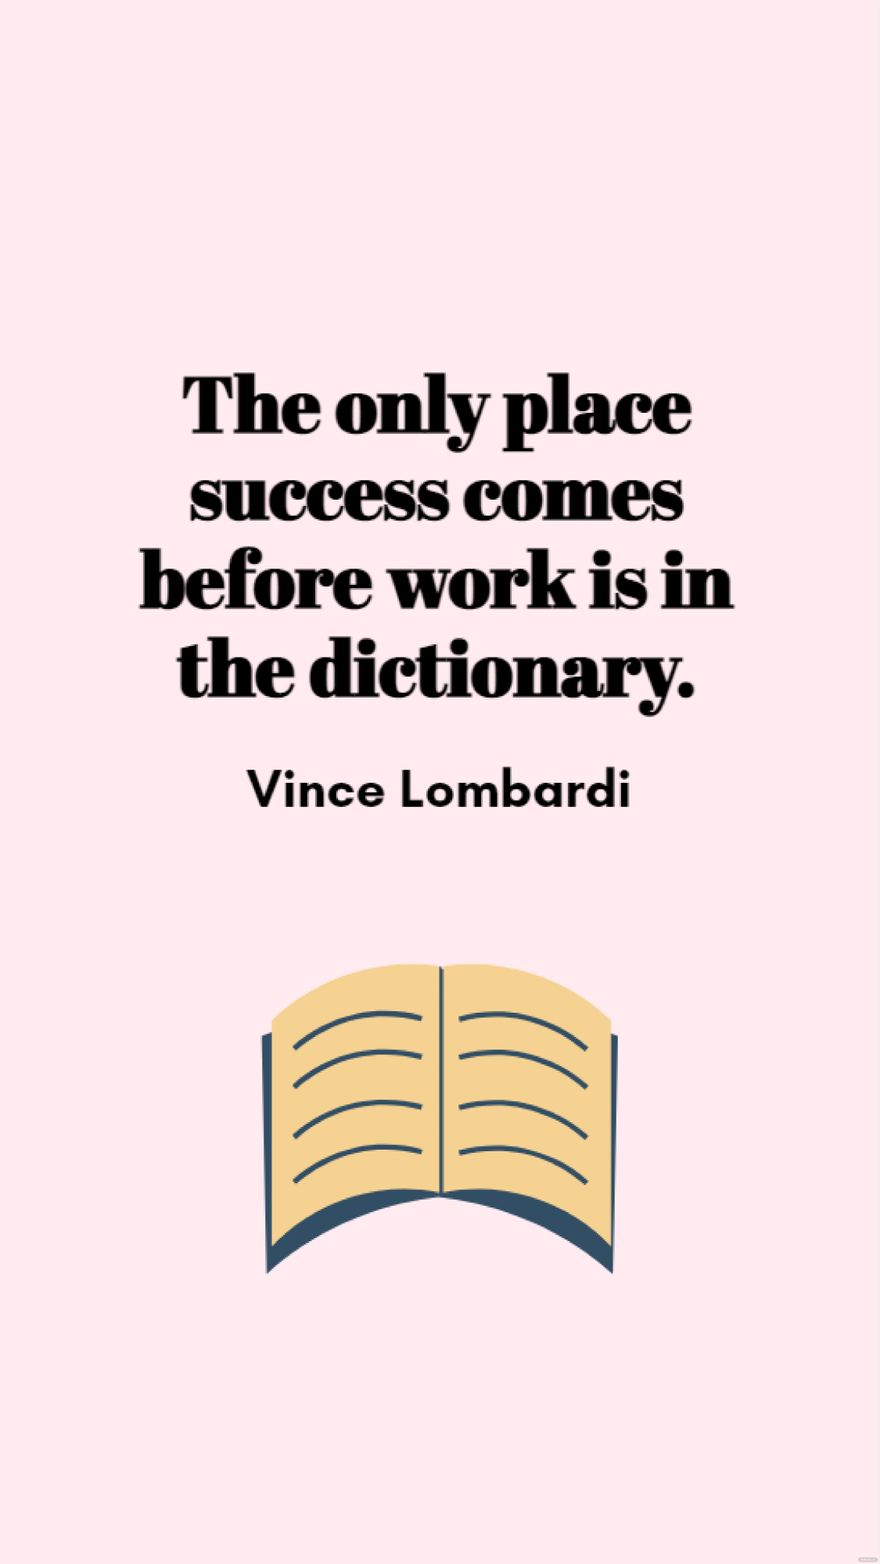 Vince Lombardi - The only place success comes before work is in the dictionary. in JPG